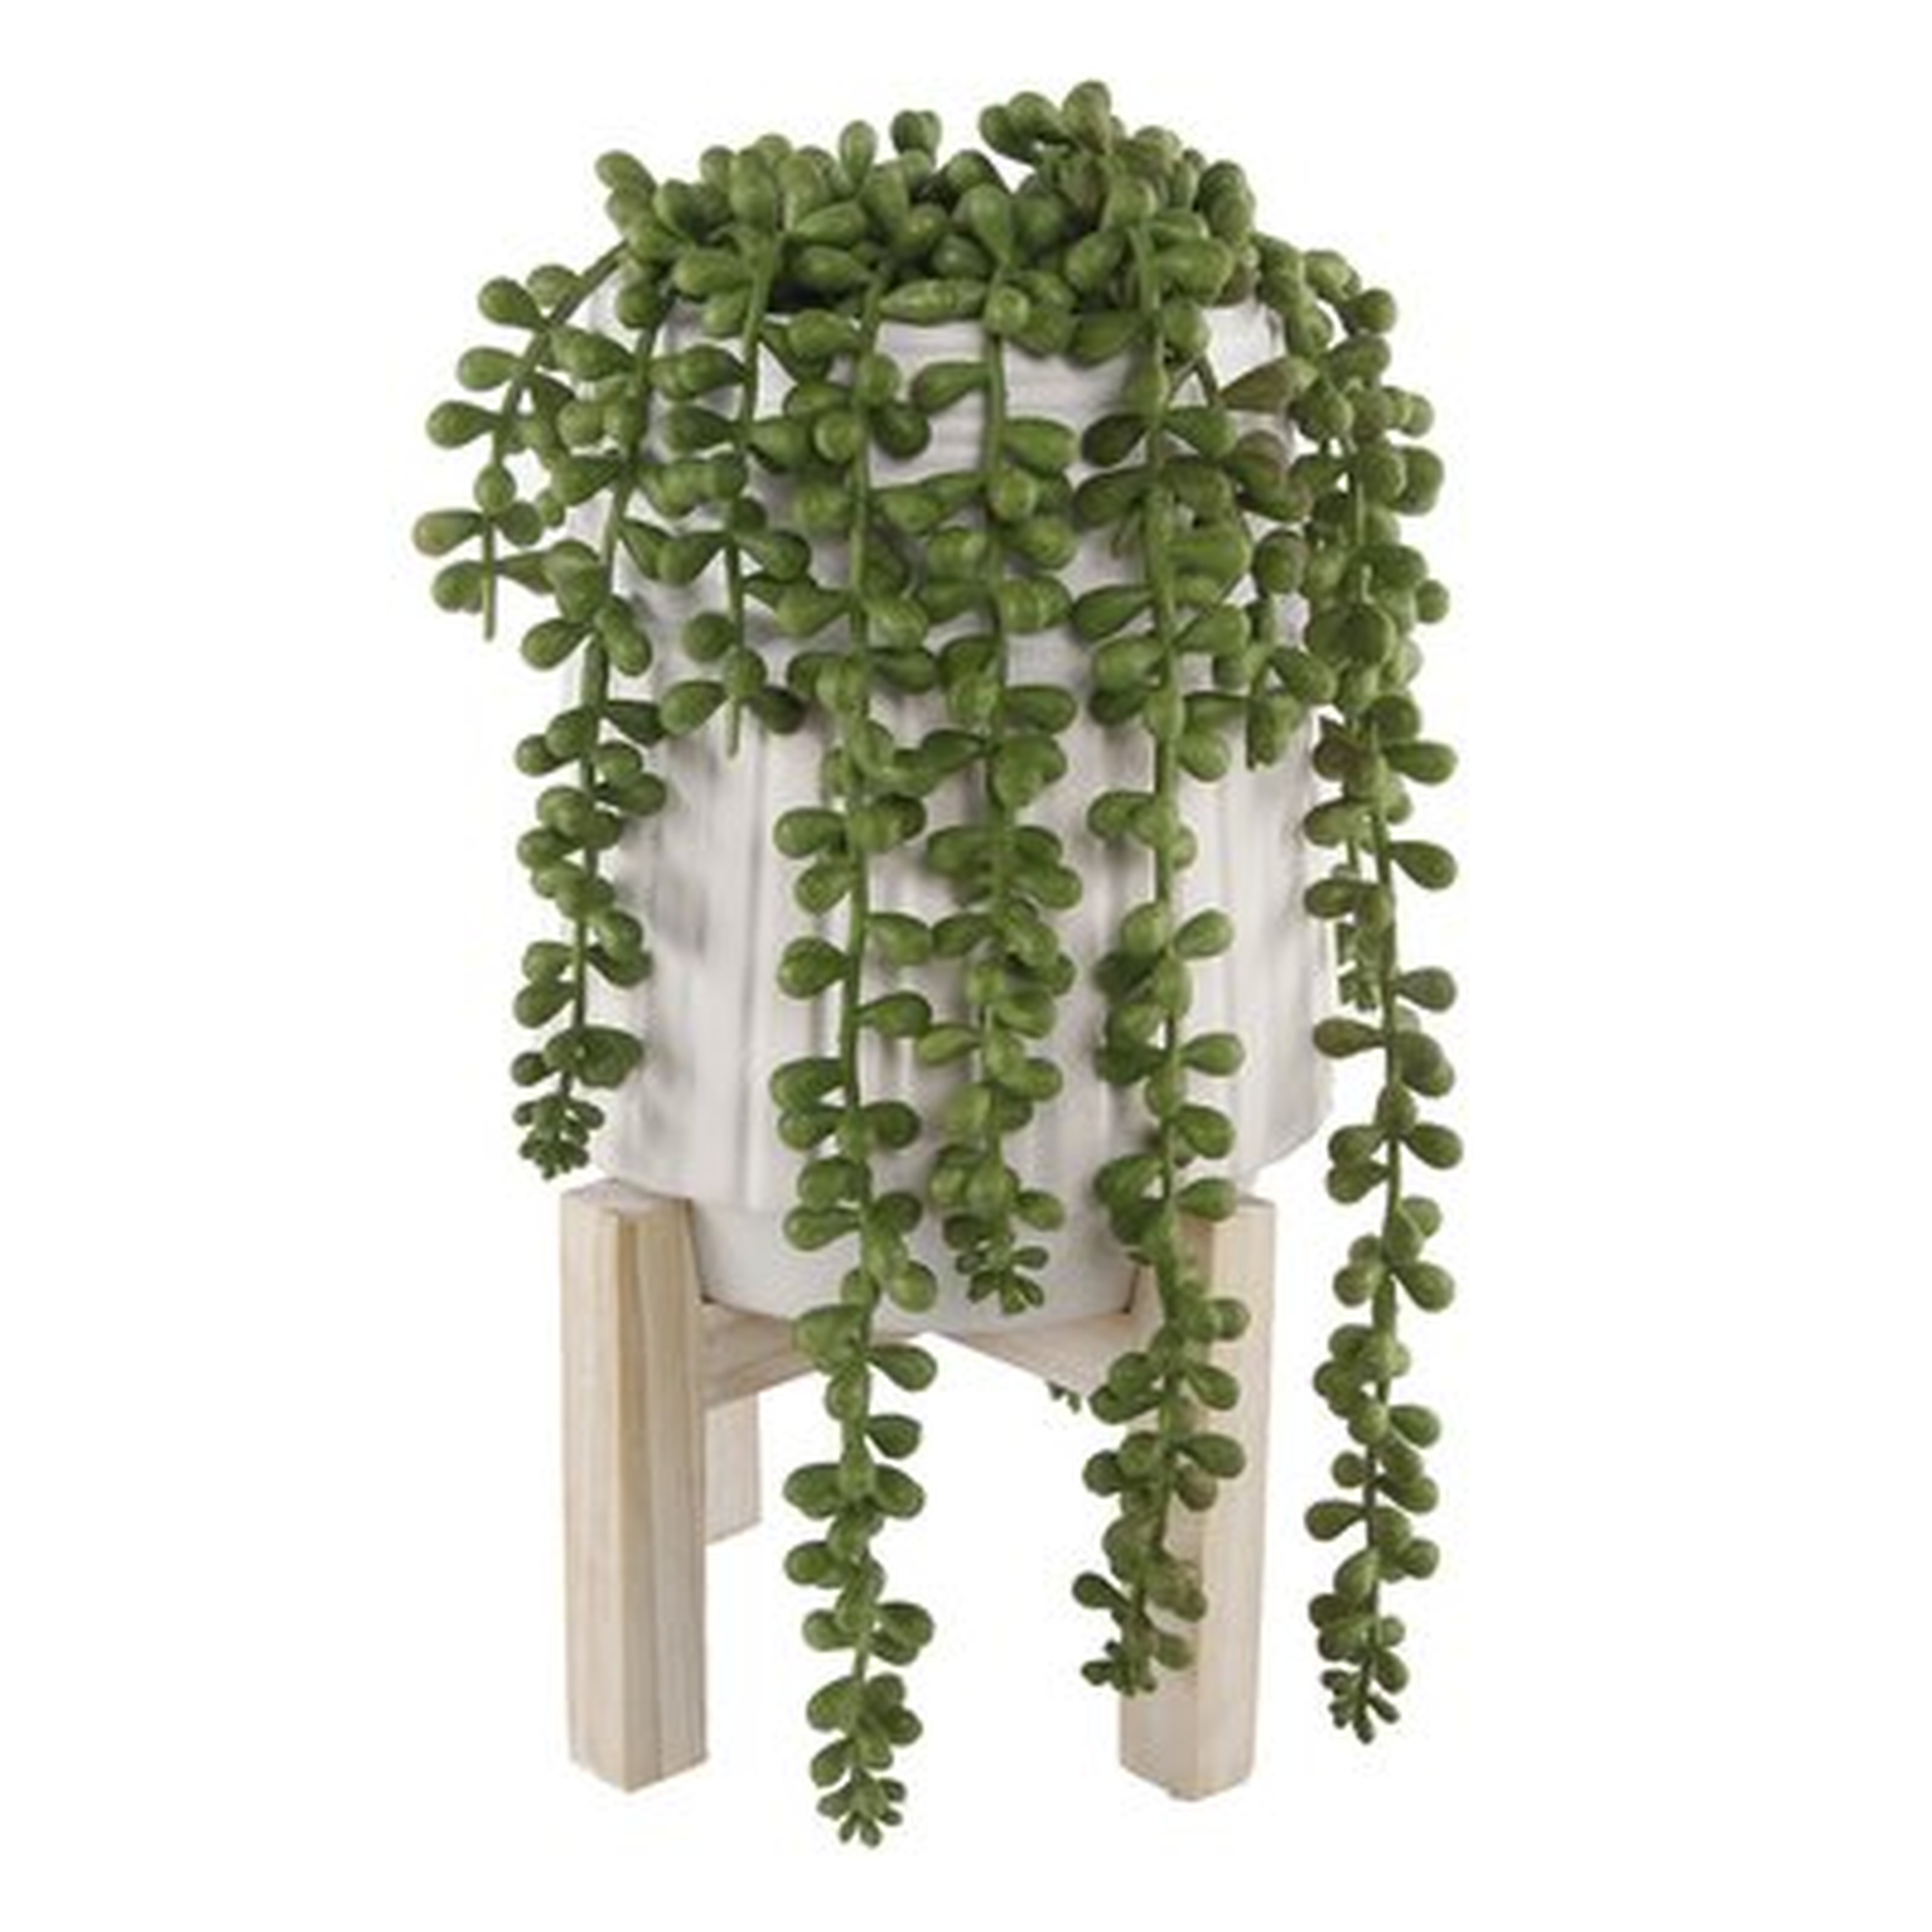 Donkey Tail String of Pearls Succulent Plant in Pot - AllModern